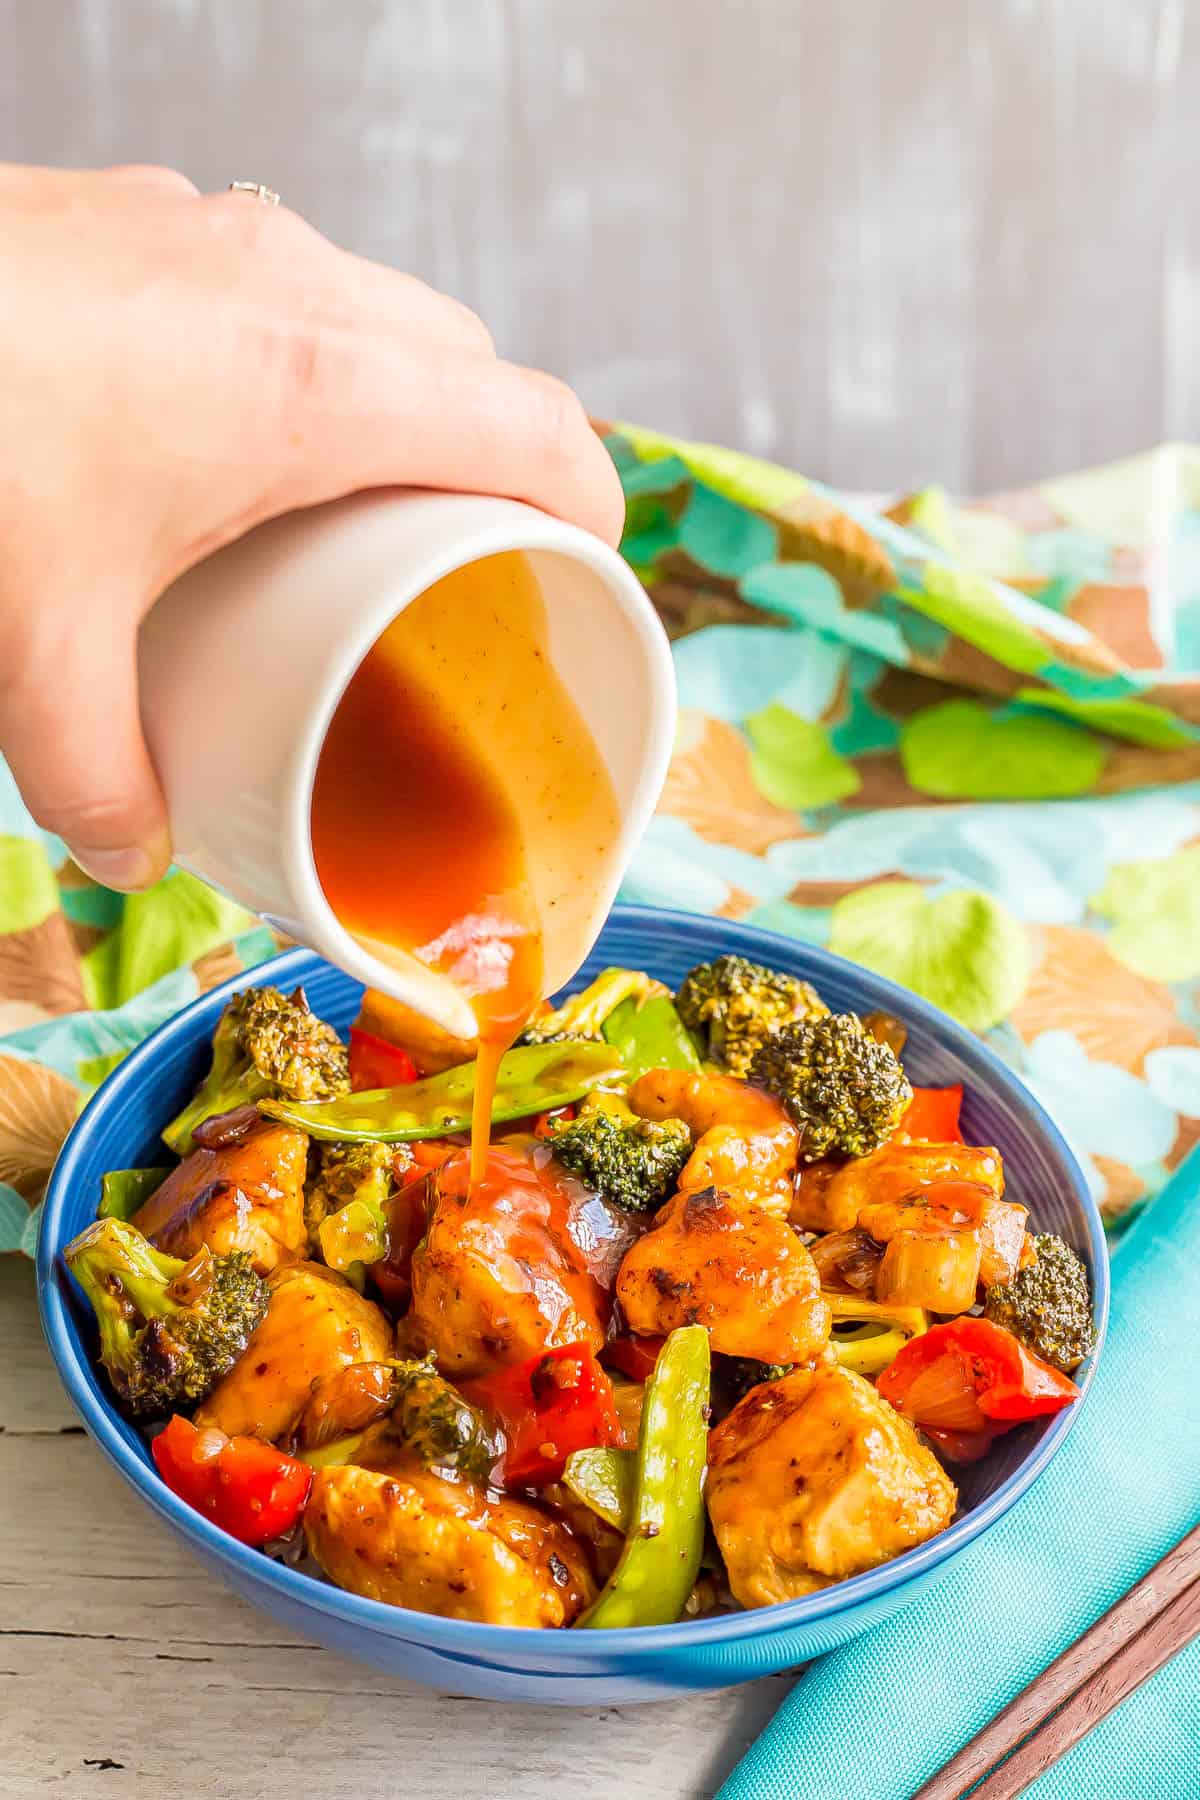 A hand pouring sweet and sour sauce over a bowl full of charred chicken pieces and a mix of vegetables.